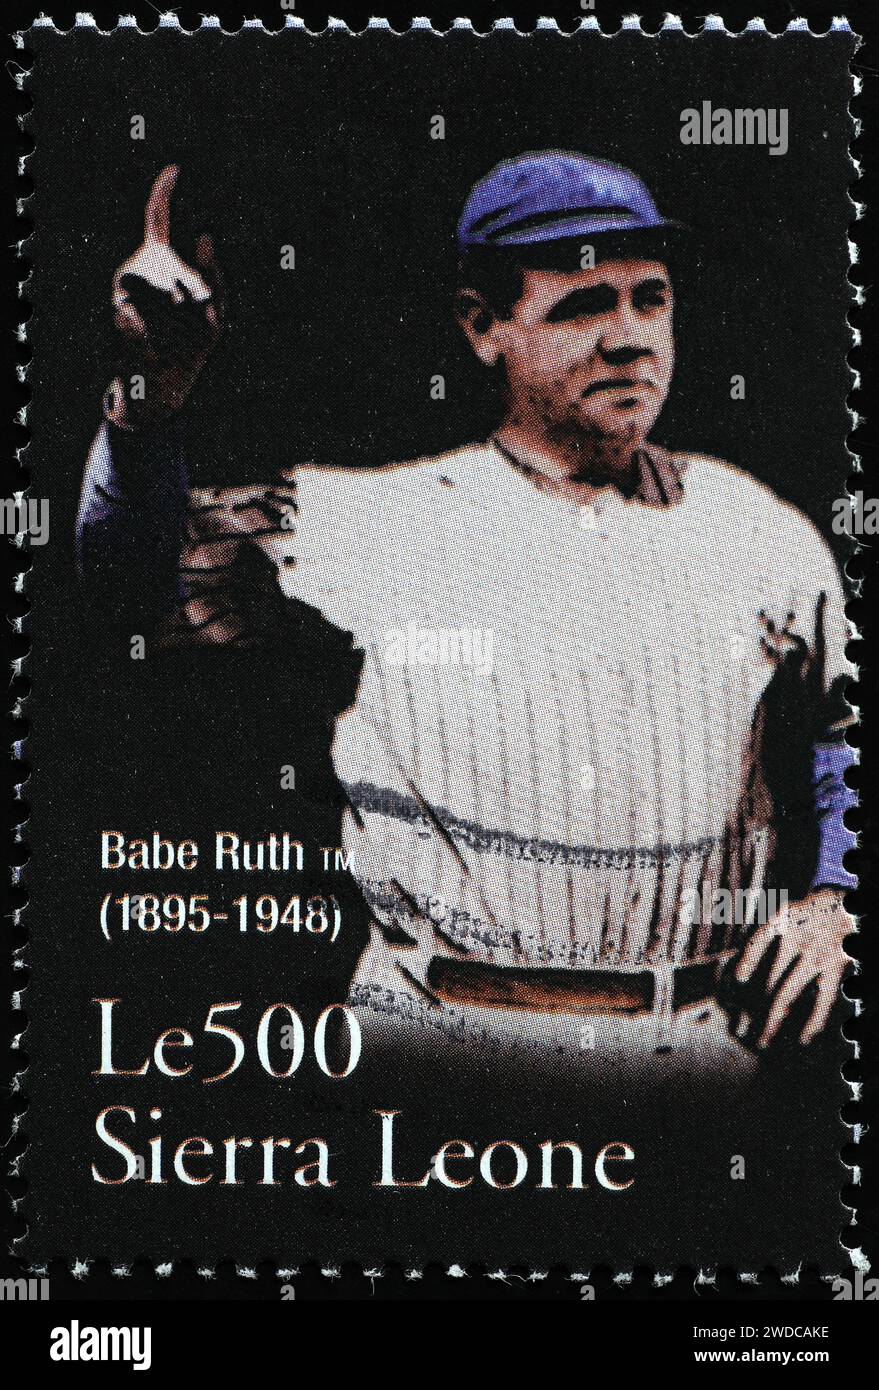 Babe Ruth in ancient picture on postage stamp Stock Photo